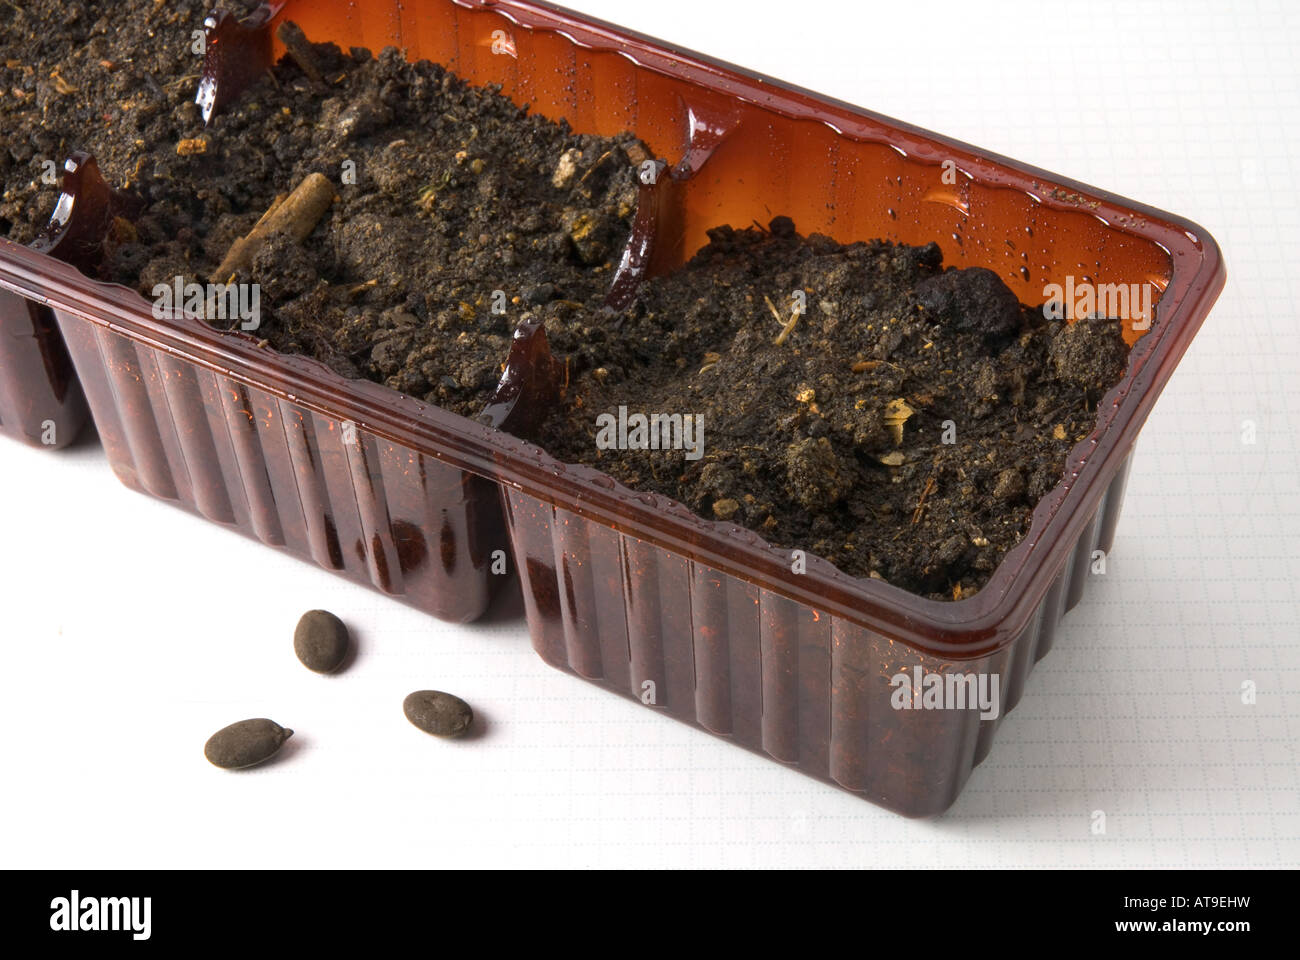 Luffa seeds and cookie pack used as a seeding pot Stock Photo